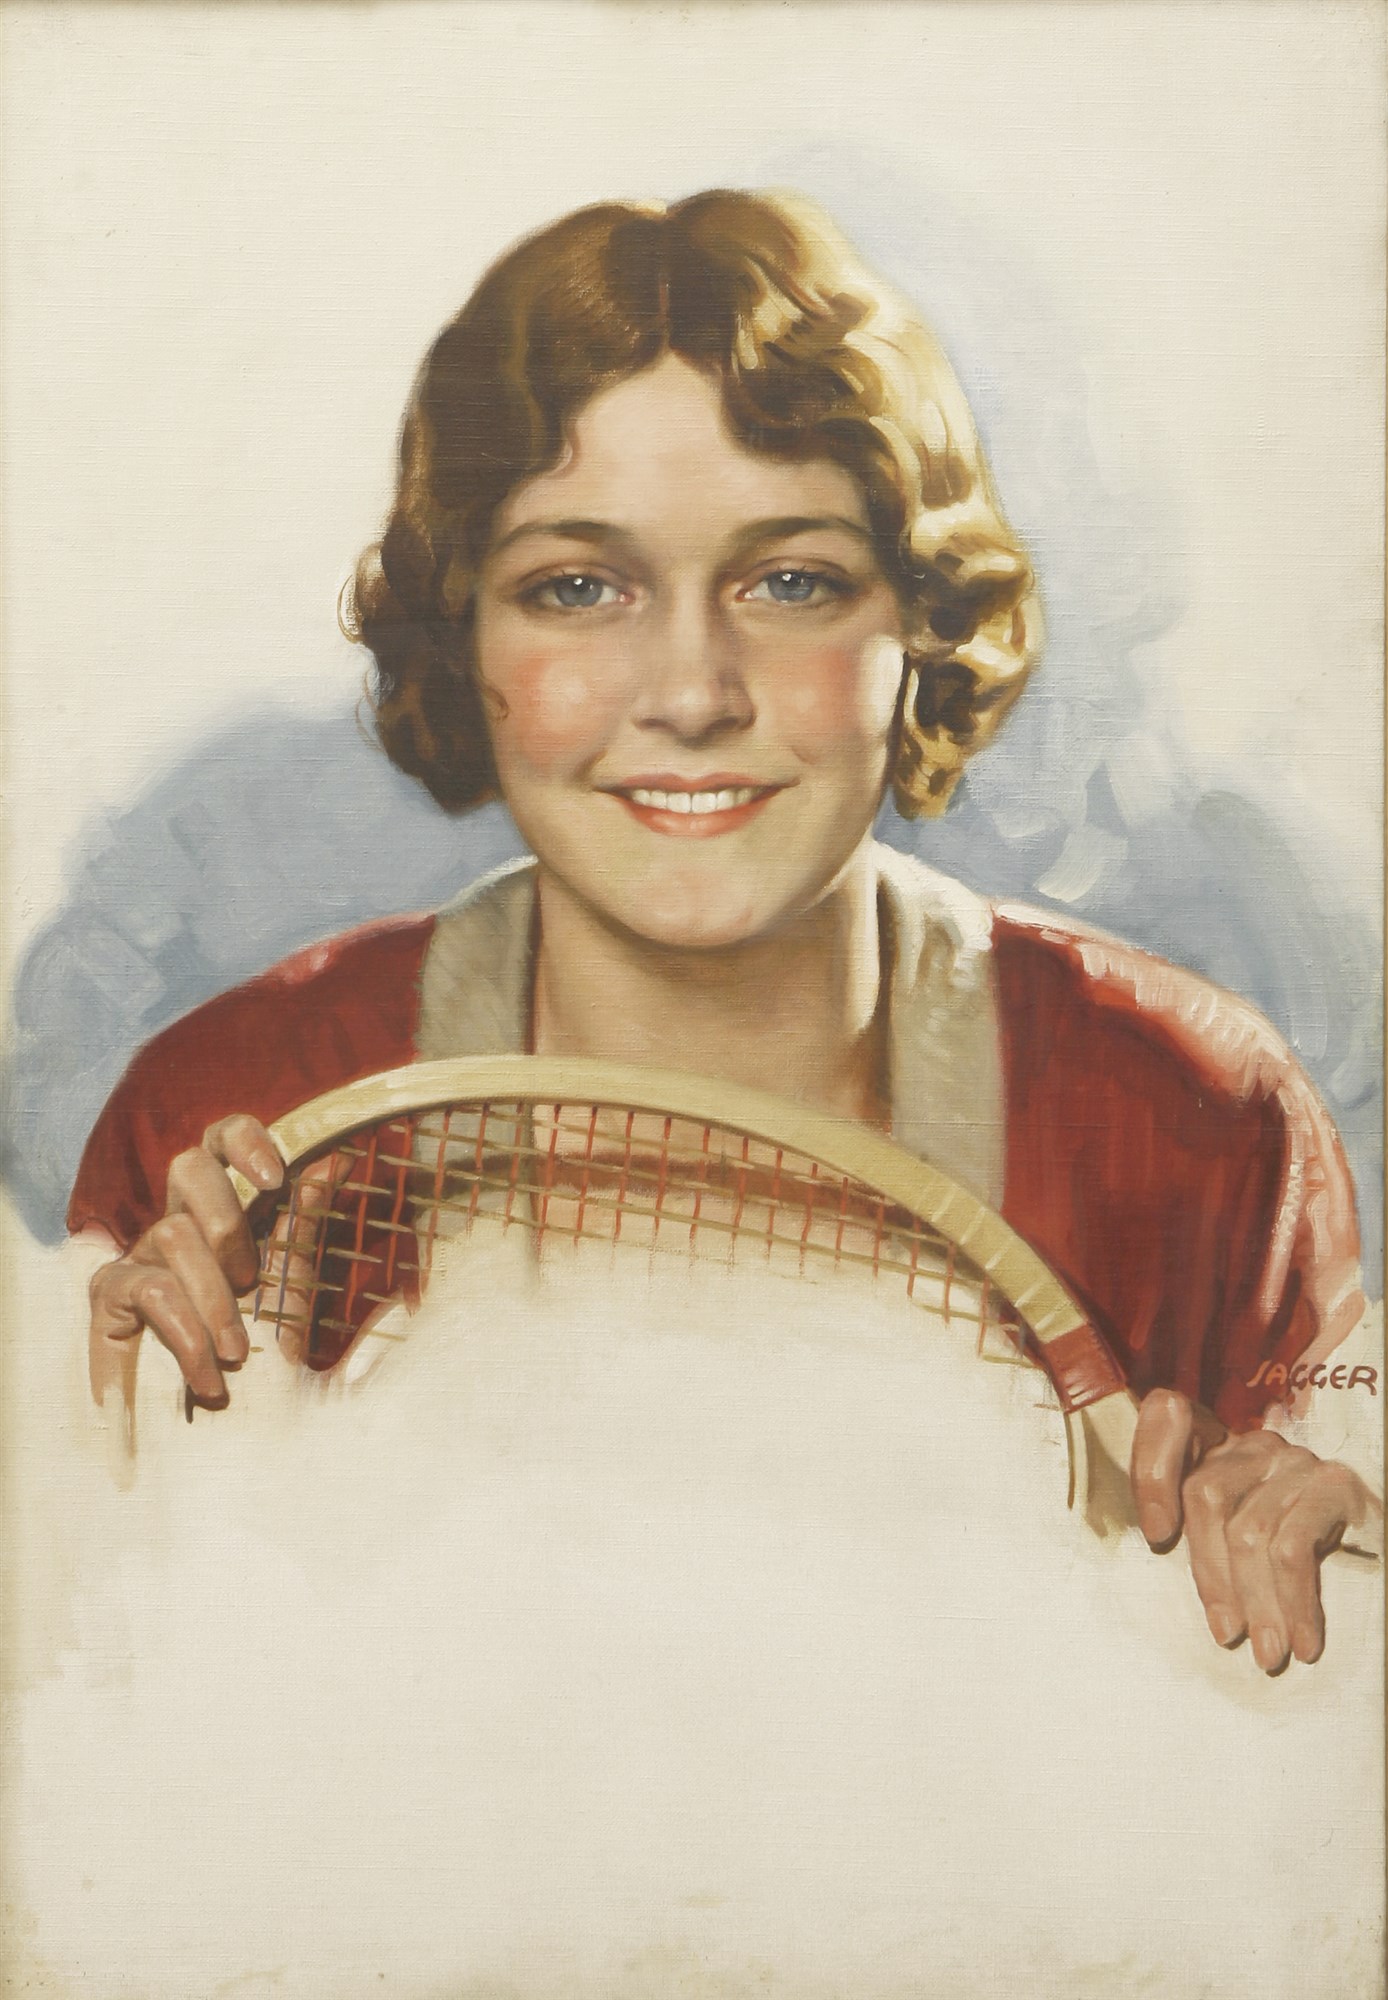 David Jagger (1891-1958), A LADY WITH A TENNIS RACQUET